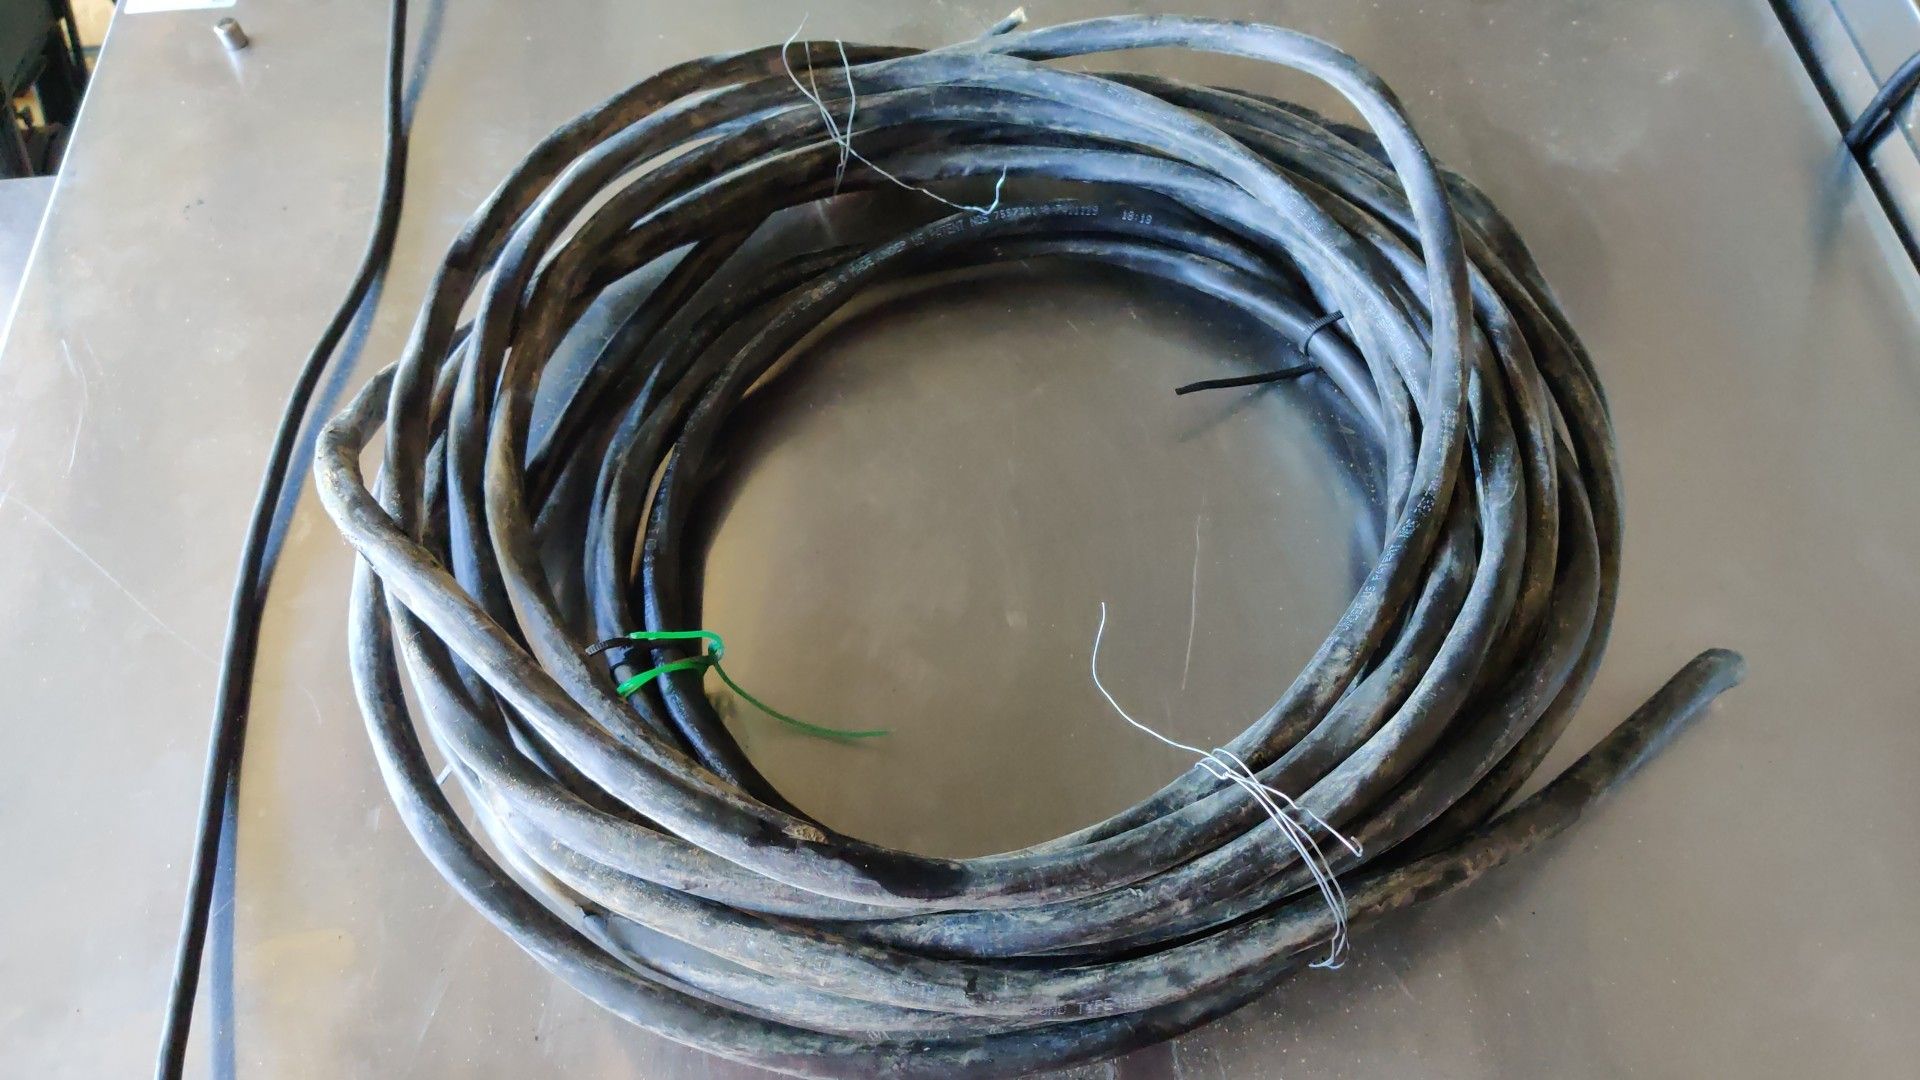 Heavy gage electrical wire left over from hot tub install